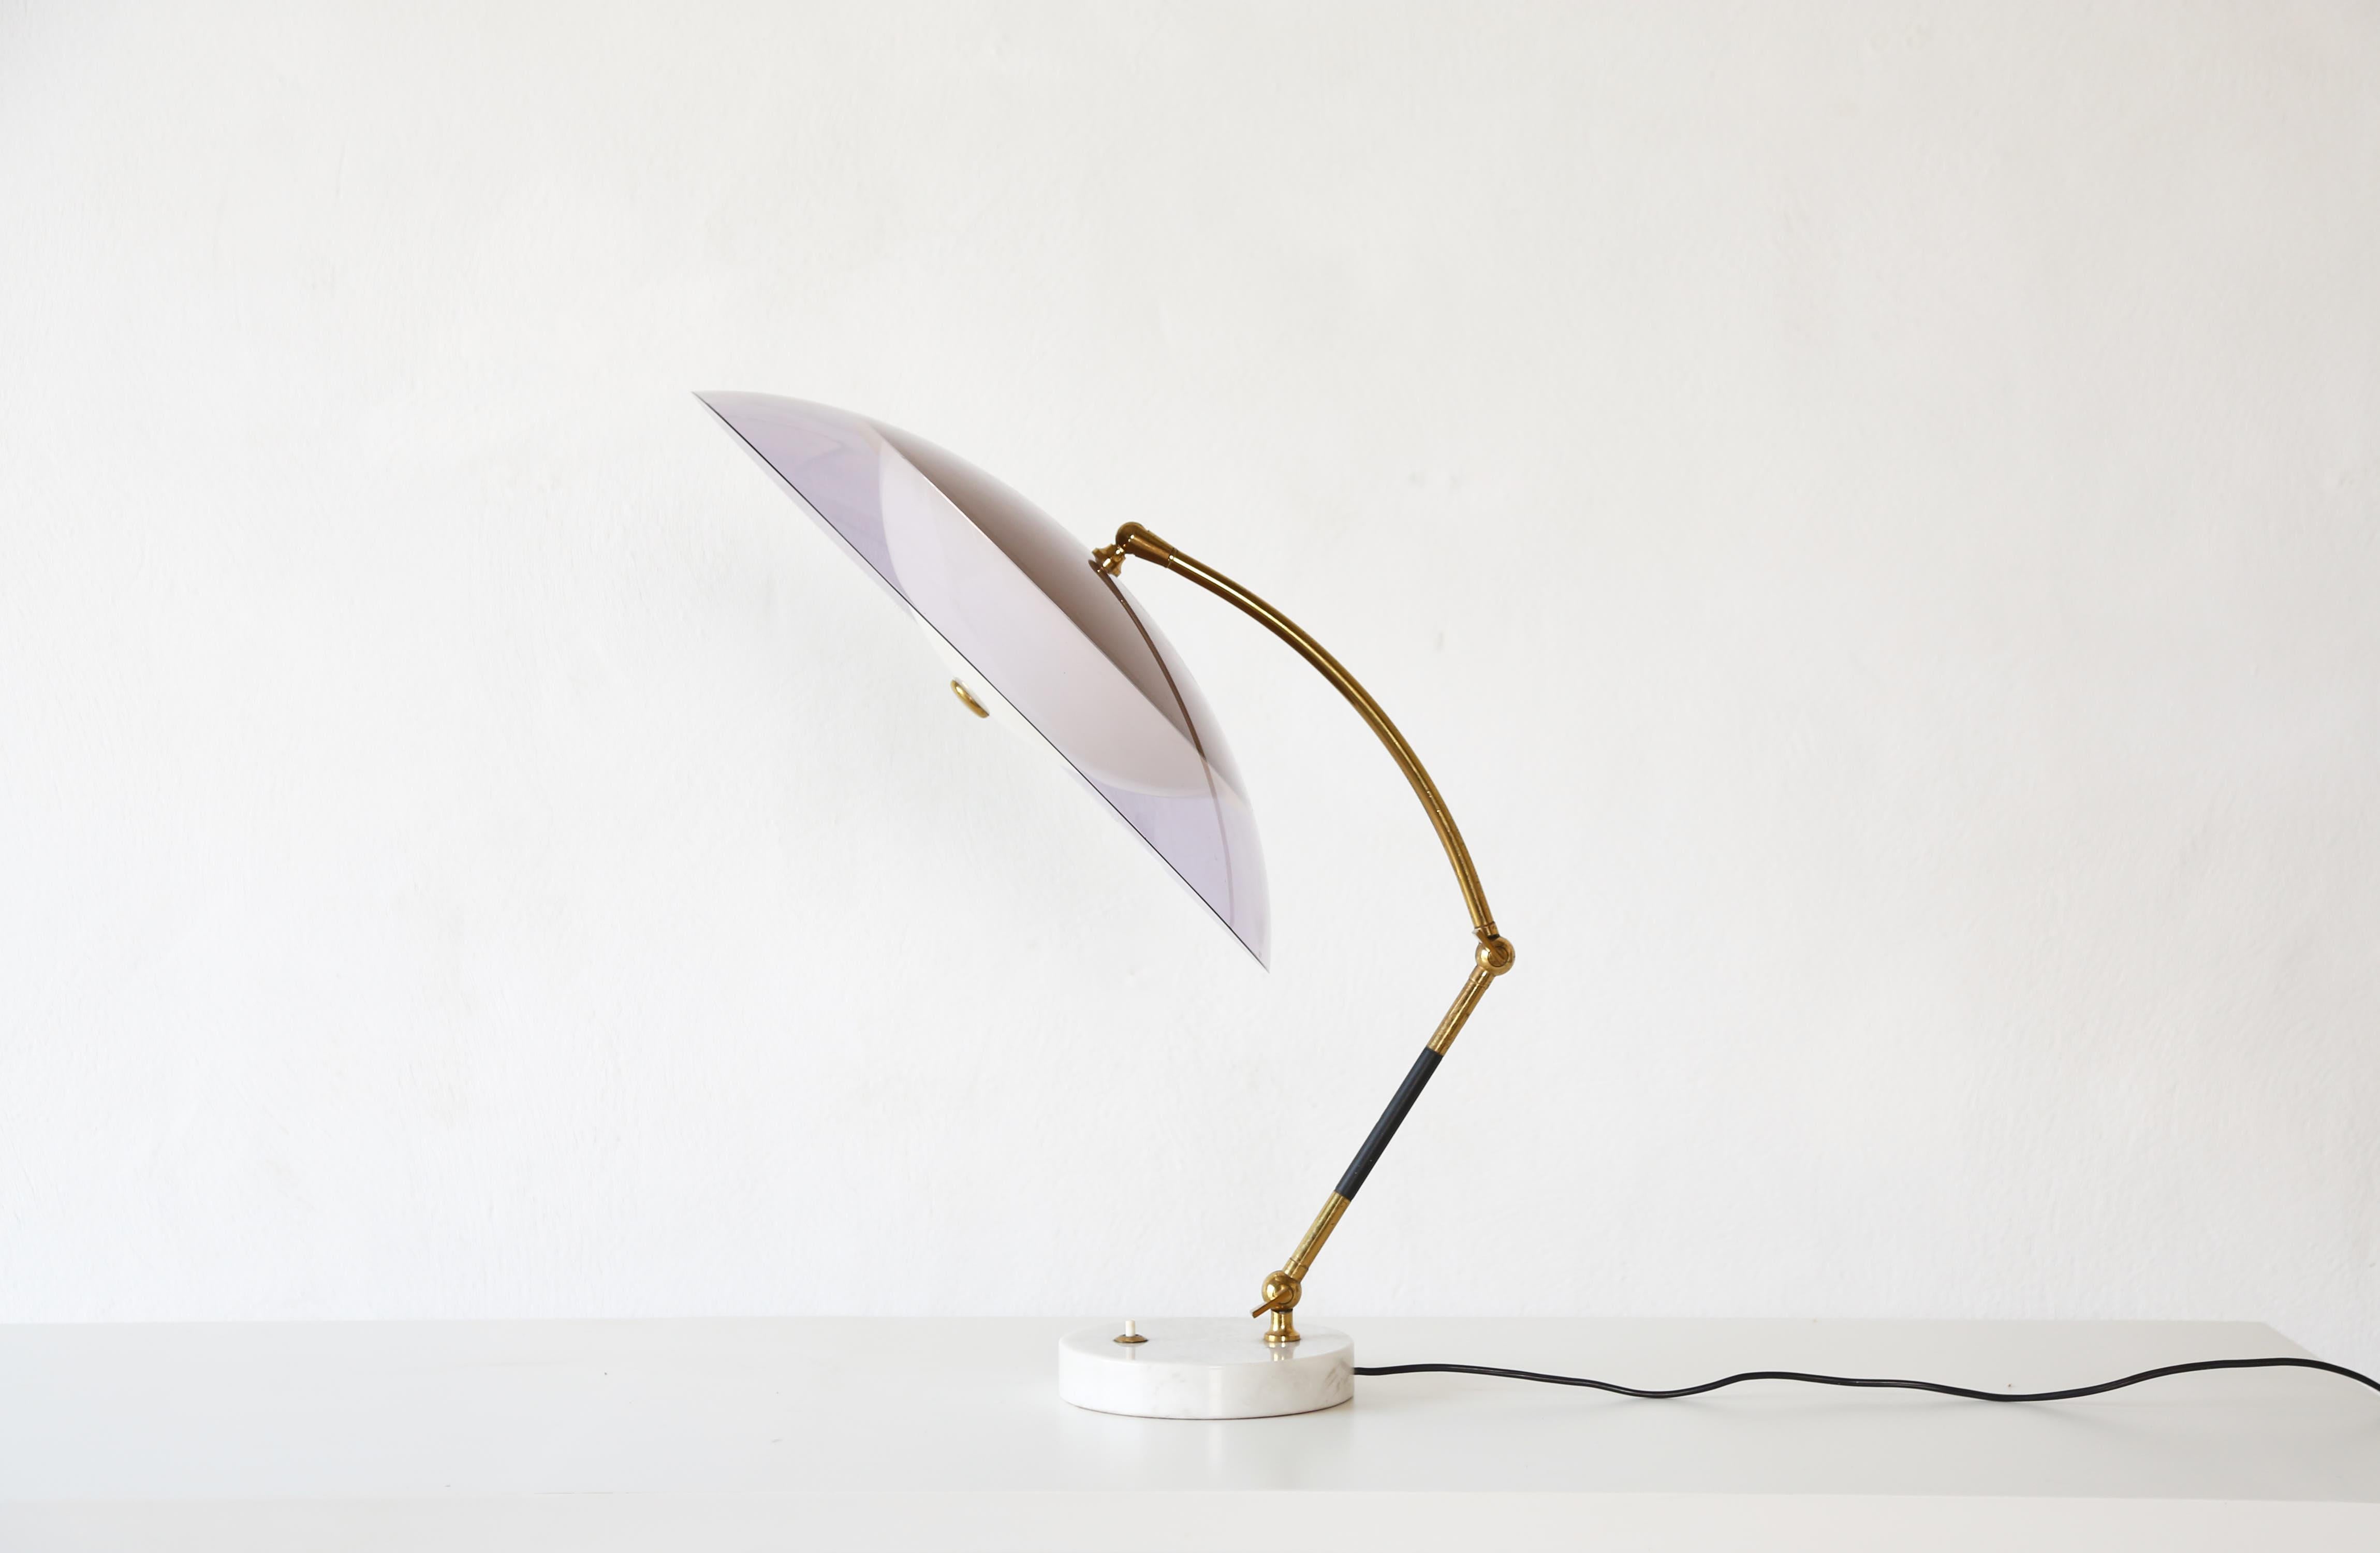 An elegant adjustable desk lamp, made by Stilux Milano, Italy in the 1960s. With a marble base, brass arm and perspex pink shade. In good original vintage condition with minor signs of use and age. Requires local rewiring prior to use. Fast shipping